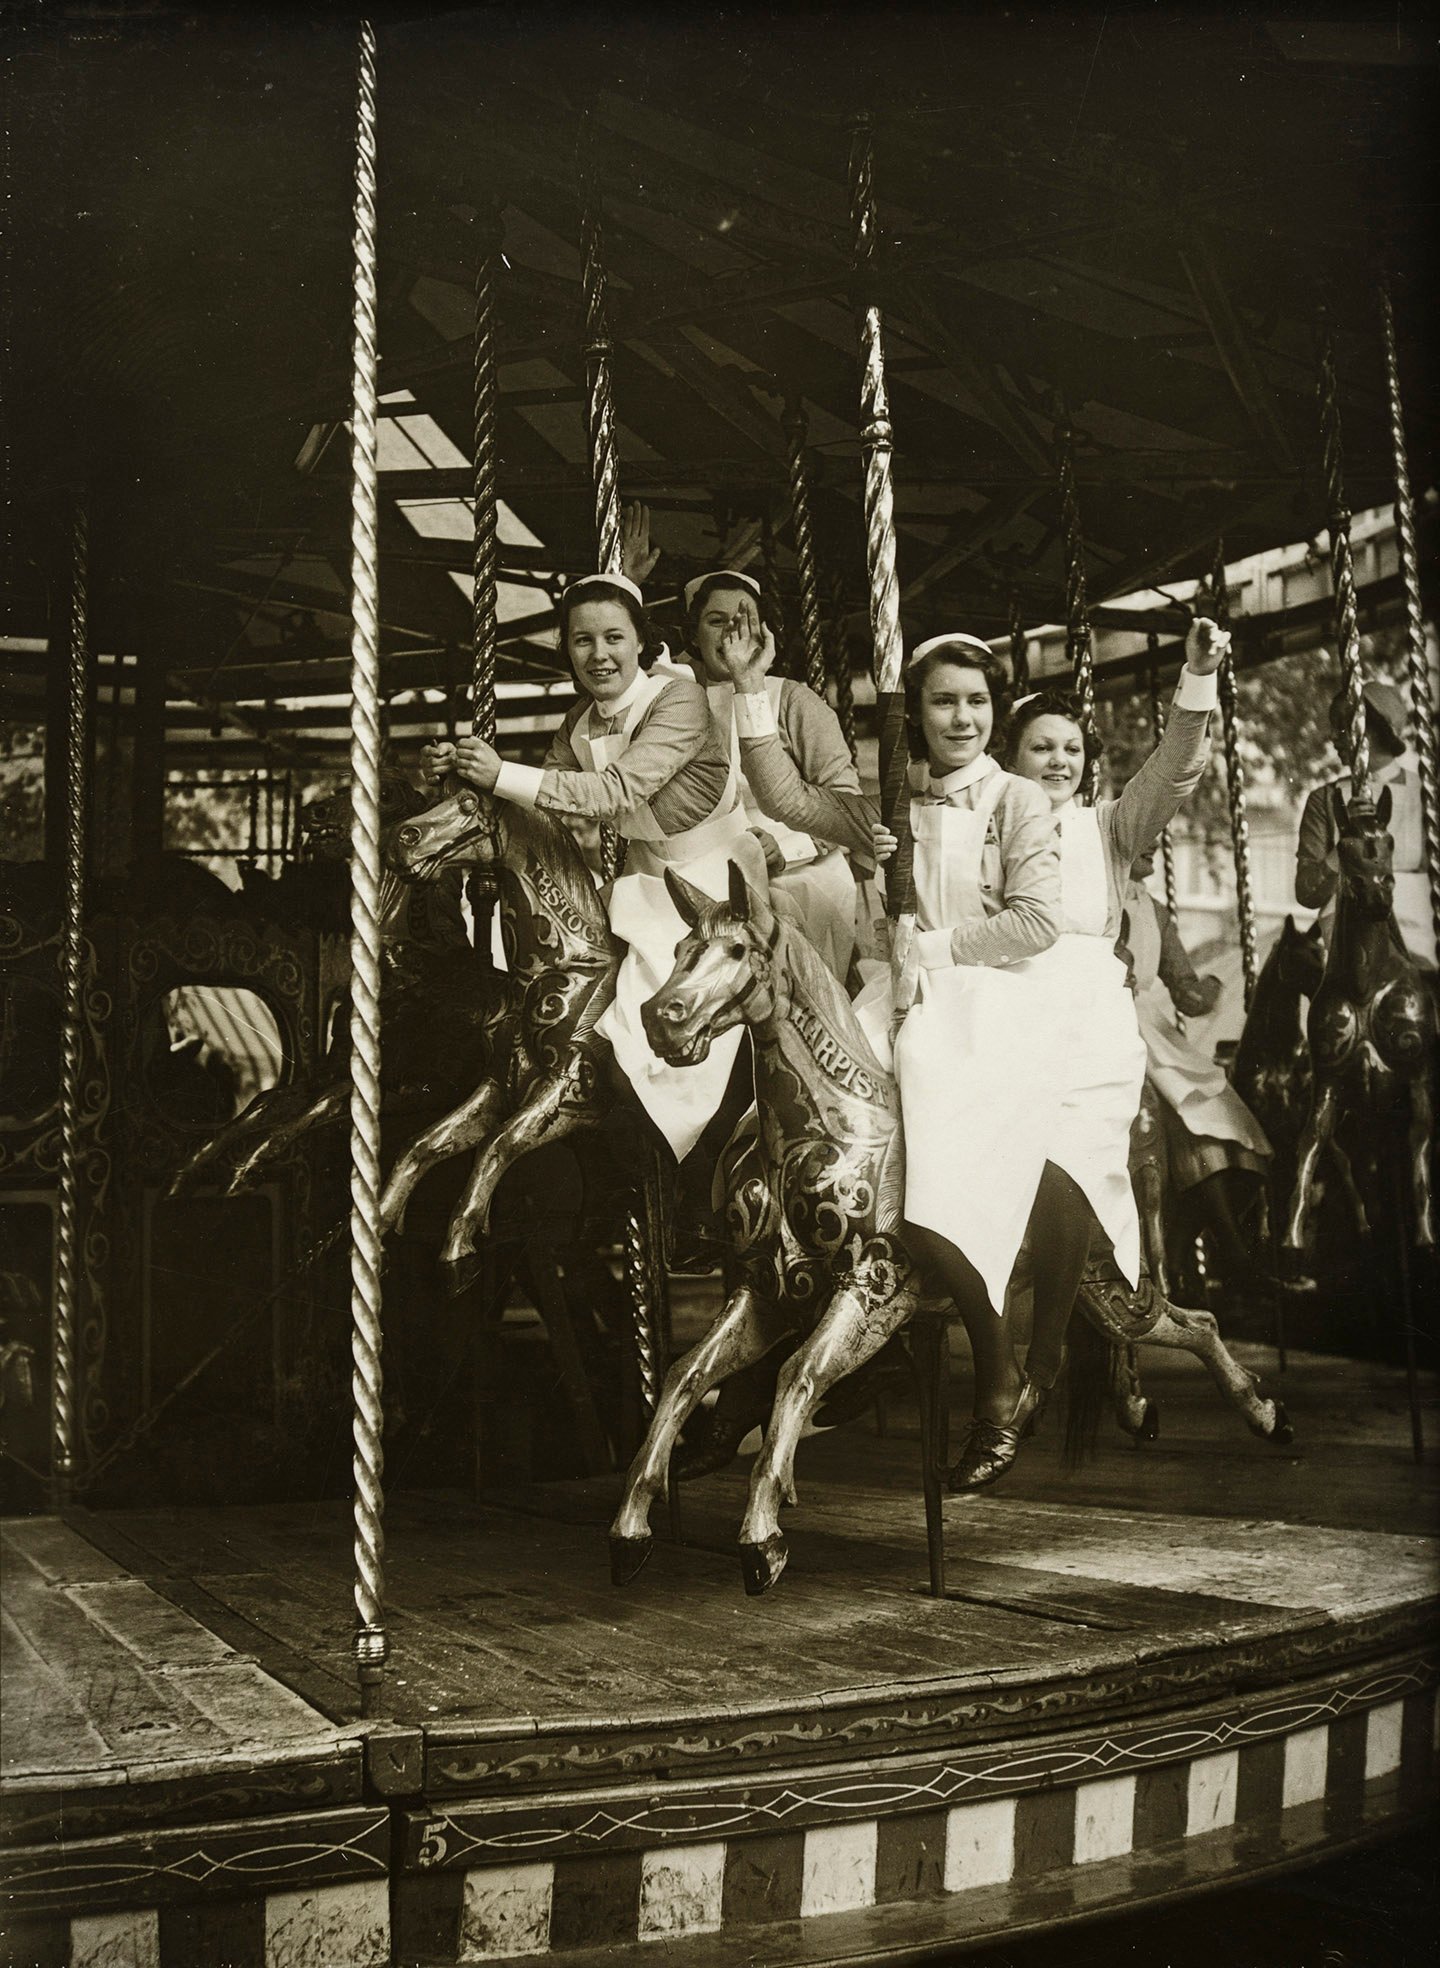 Nurses waving from a merry-go-round